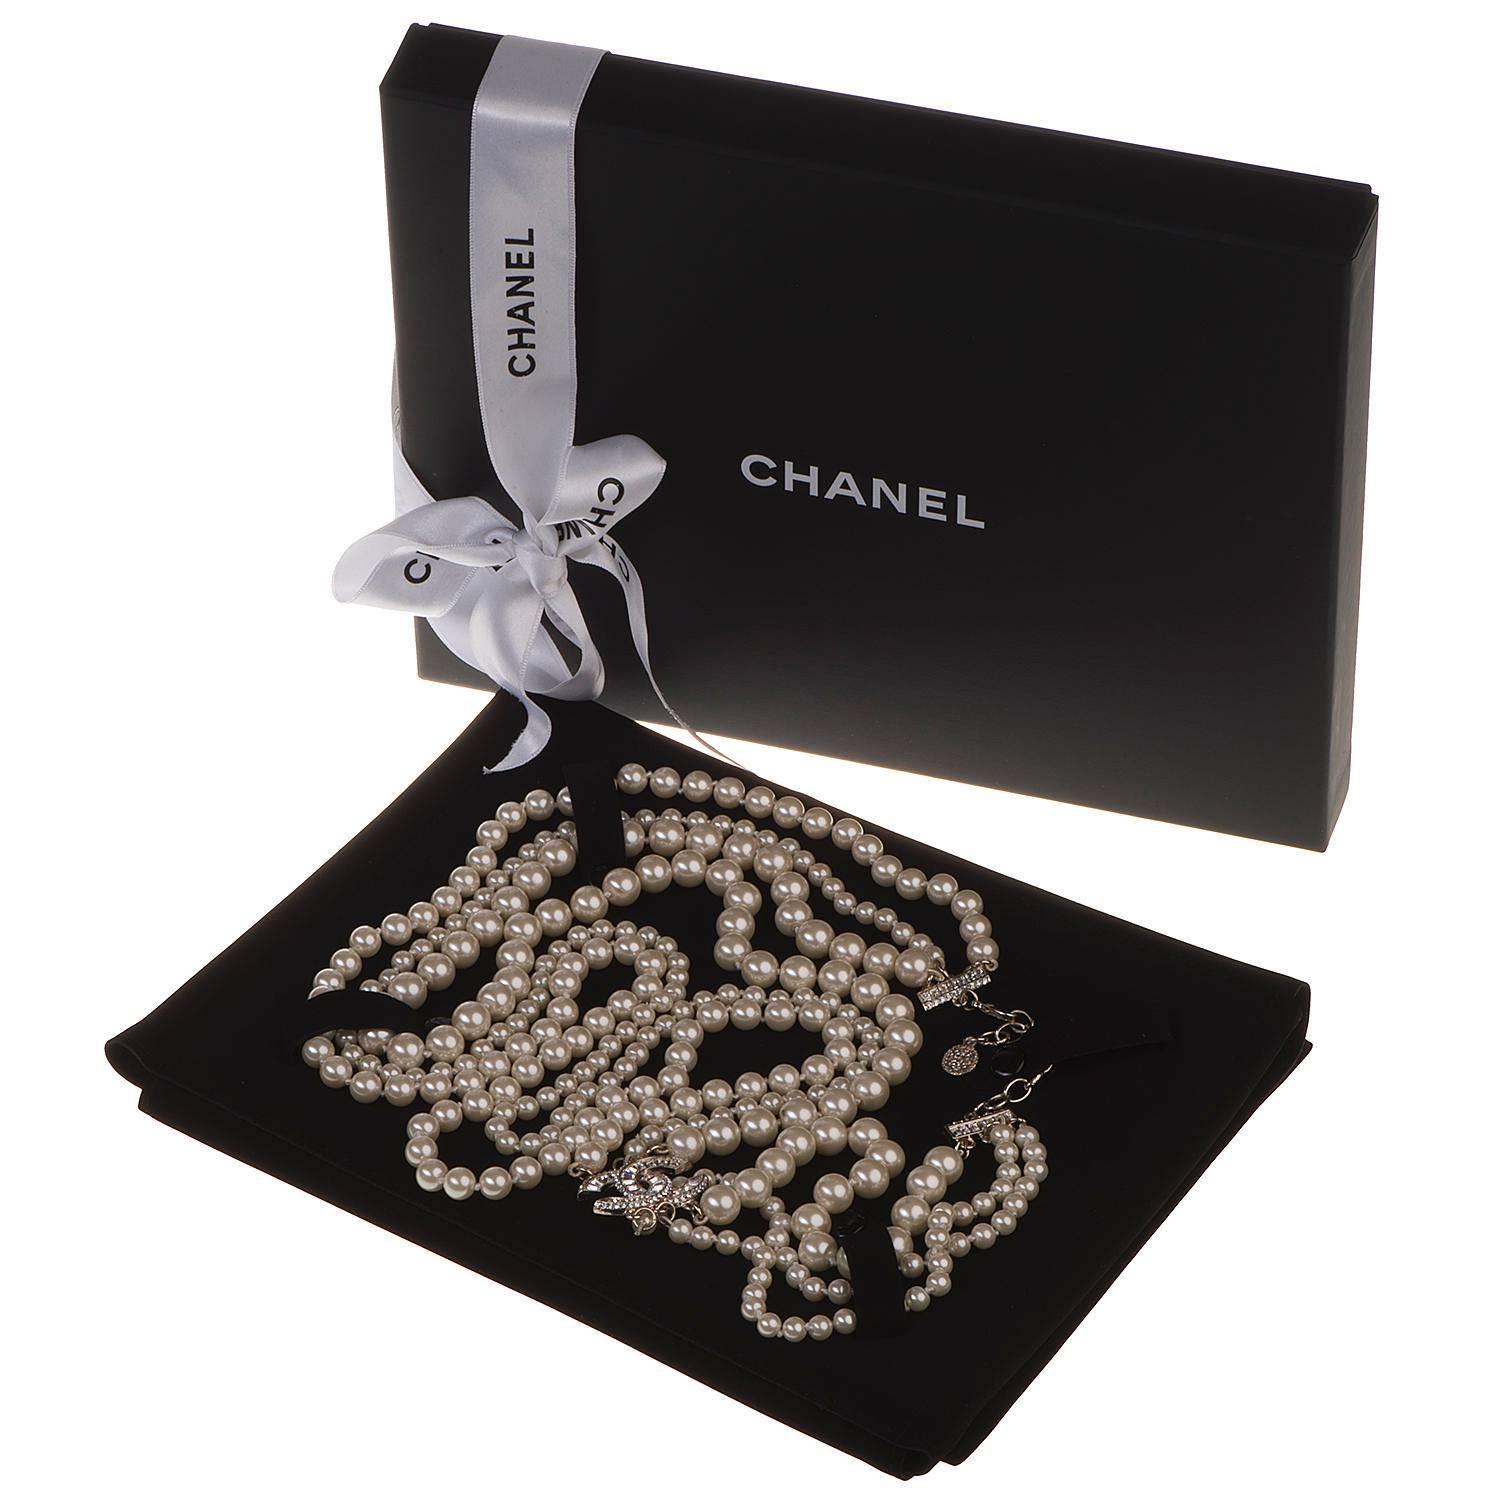 A Fabulous Large Pearl 3-String Sautior by Chanel. In superb, pristine, store-fresh condition the pearls are decorated with the iconic interlocking CC, inset with Art Deco style cut glass stones. This signed piece comes with it's original gift Box &